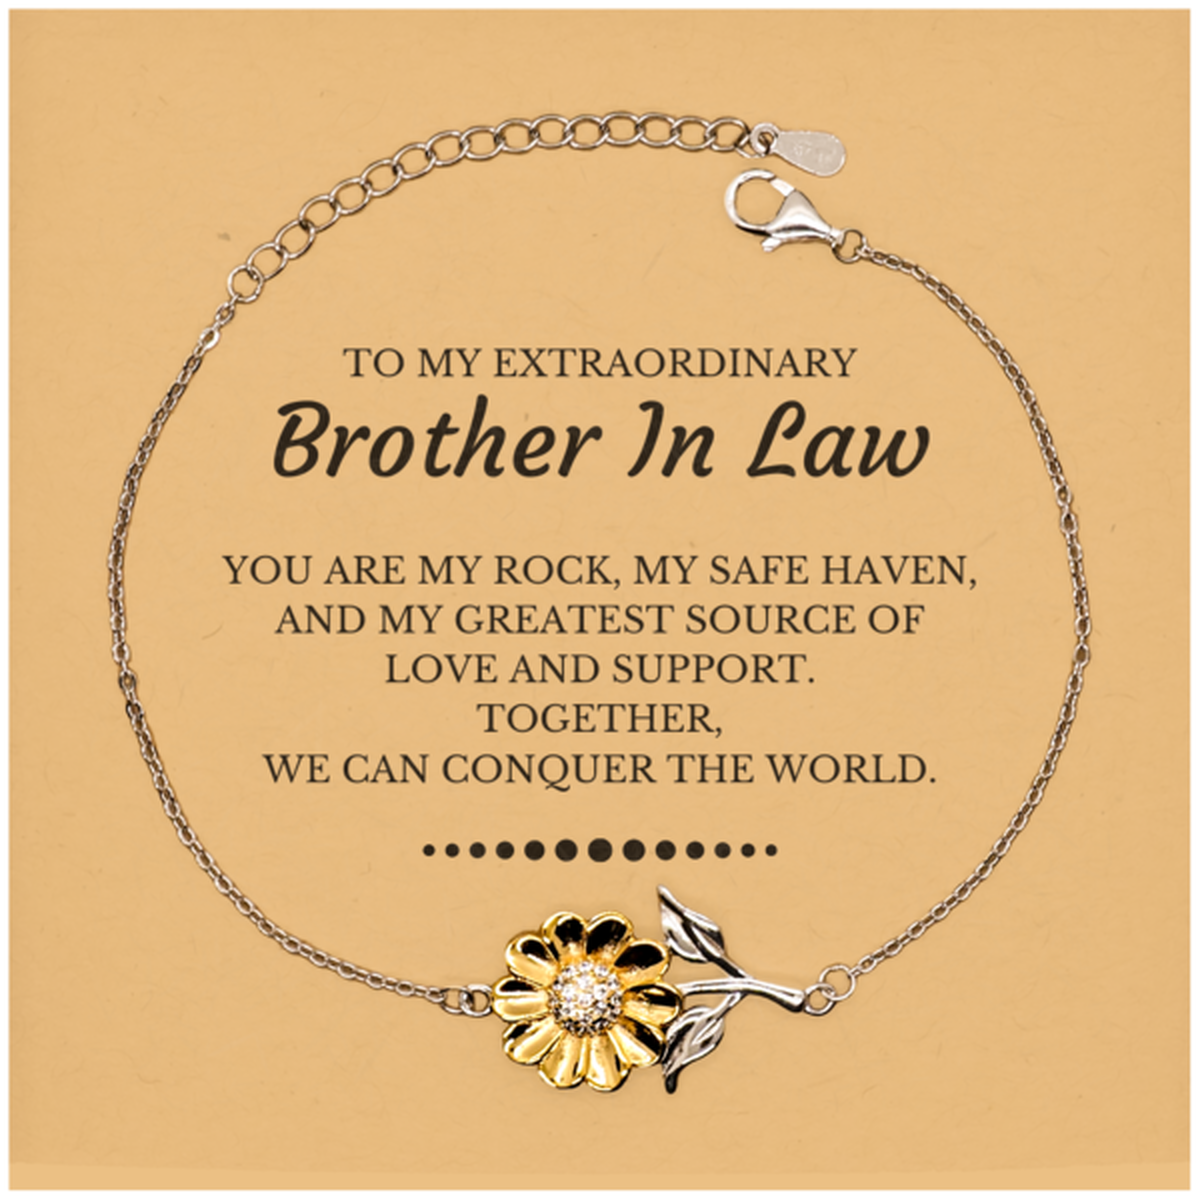 To My Extraordinary Brother In Law Gifts, Together, we can conquer the world, Birthday Christmas Sunflower Bracelet For Brother In Law, Christmas Gifts For Brother In Law